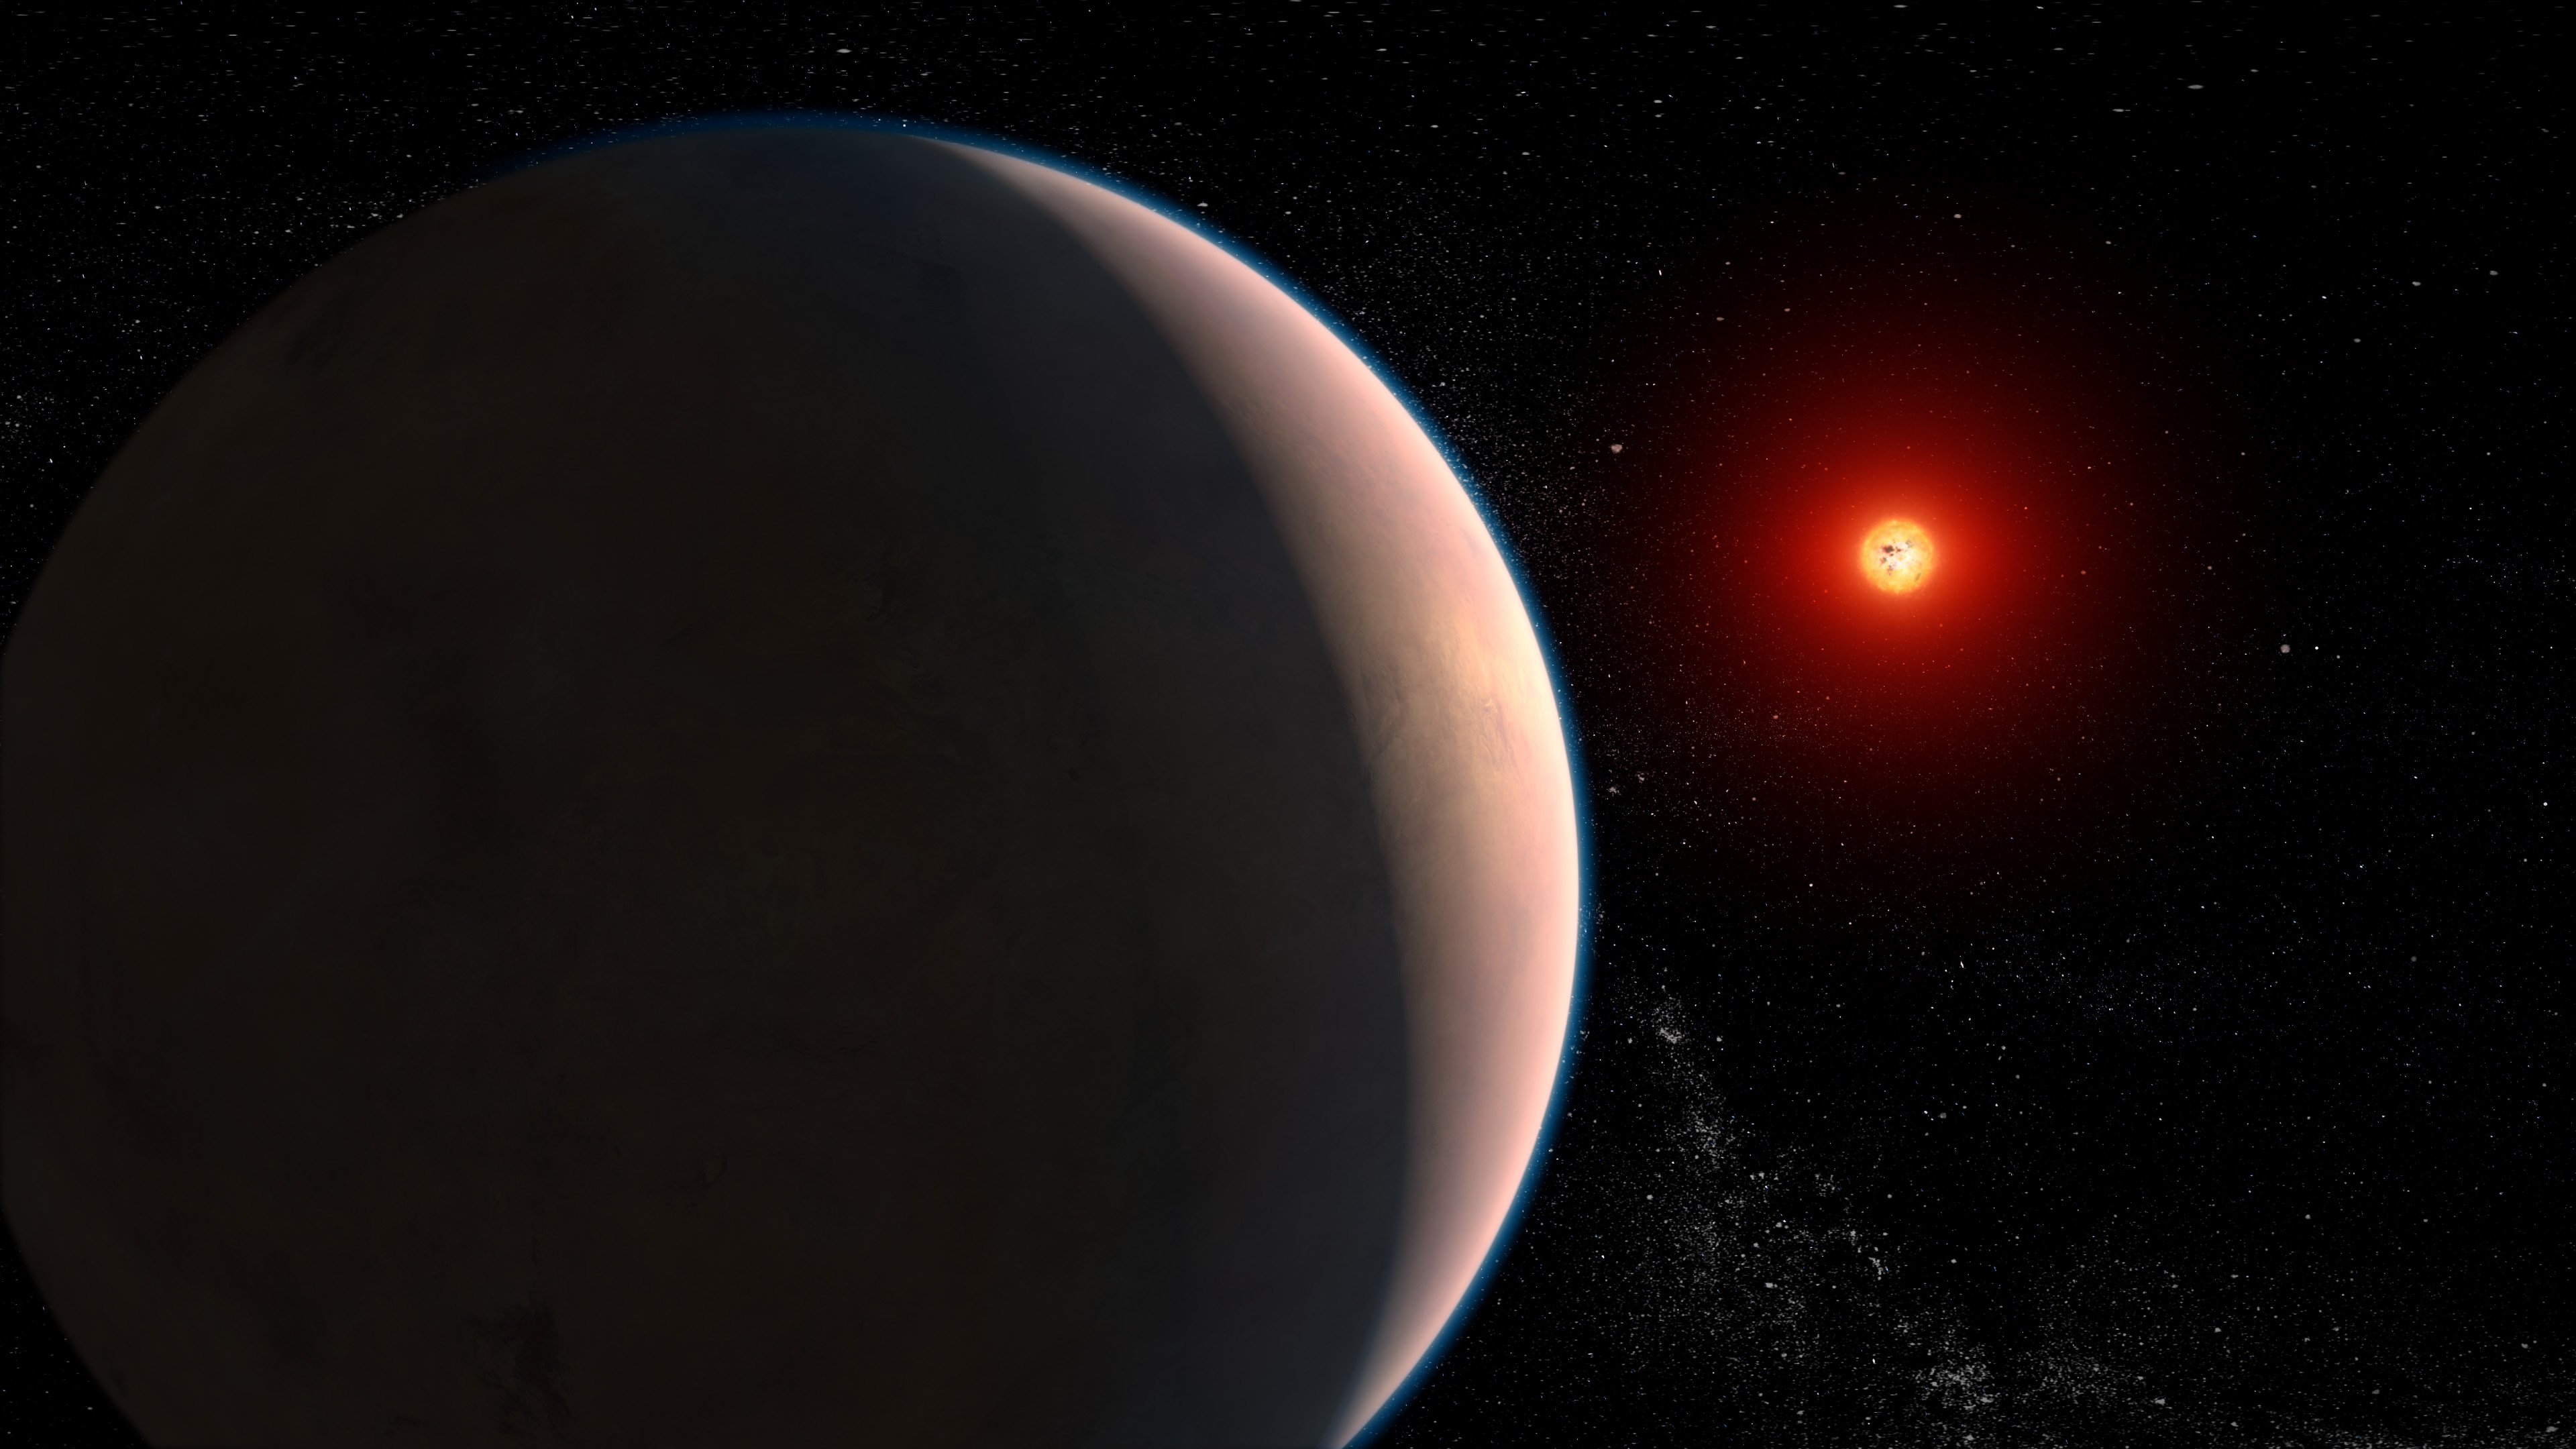 The faint glow of a red star in the distance illuminates the surface of a planet. The viewer sees just a warm crescent of the planet's surface.